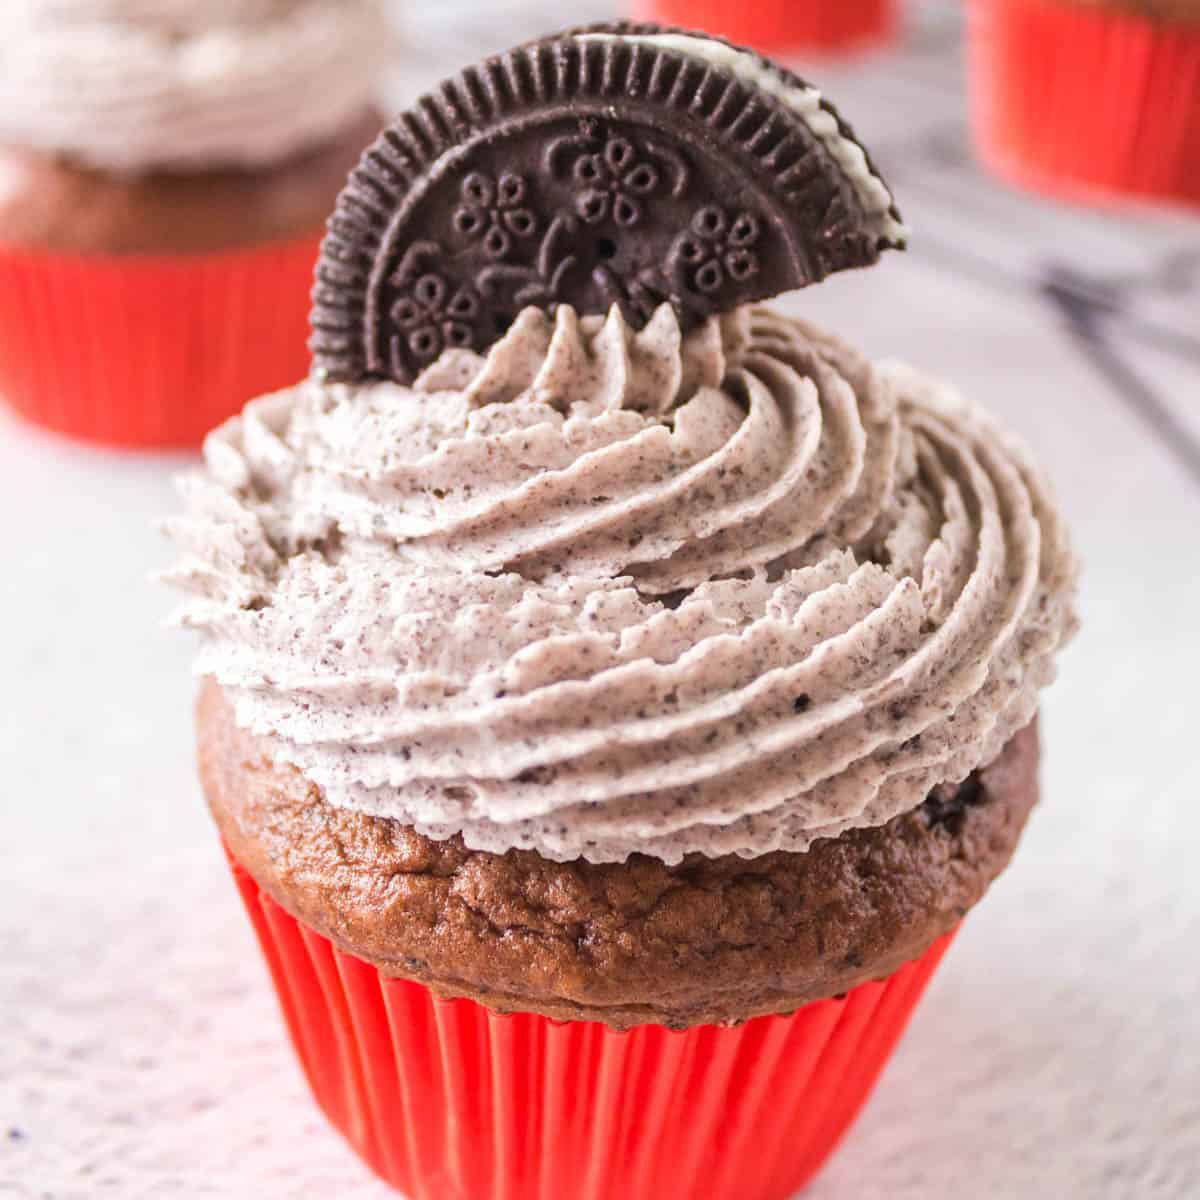 Oreo Cupcakes and Oreo Buttercream Frosting